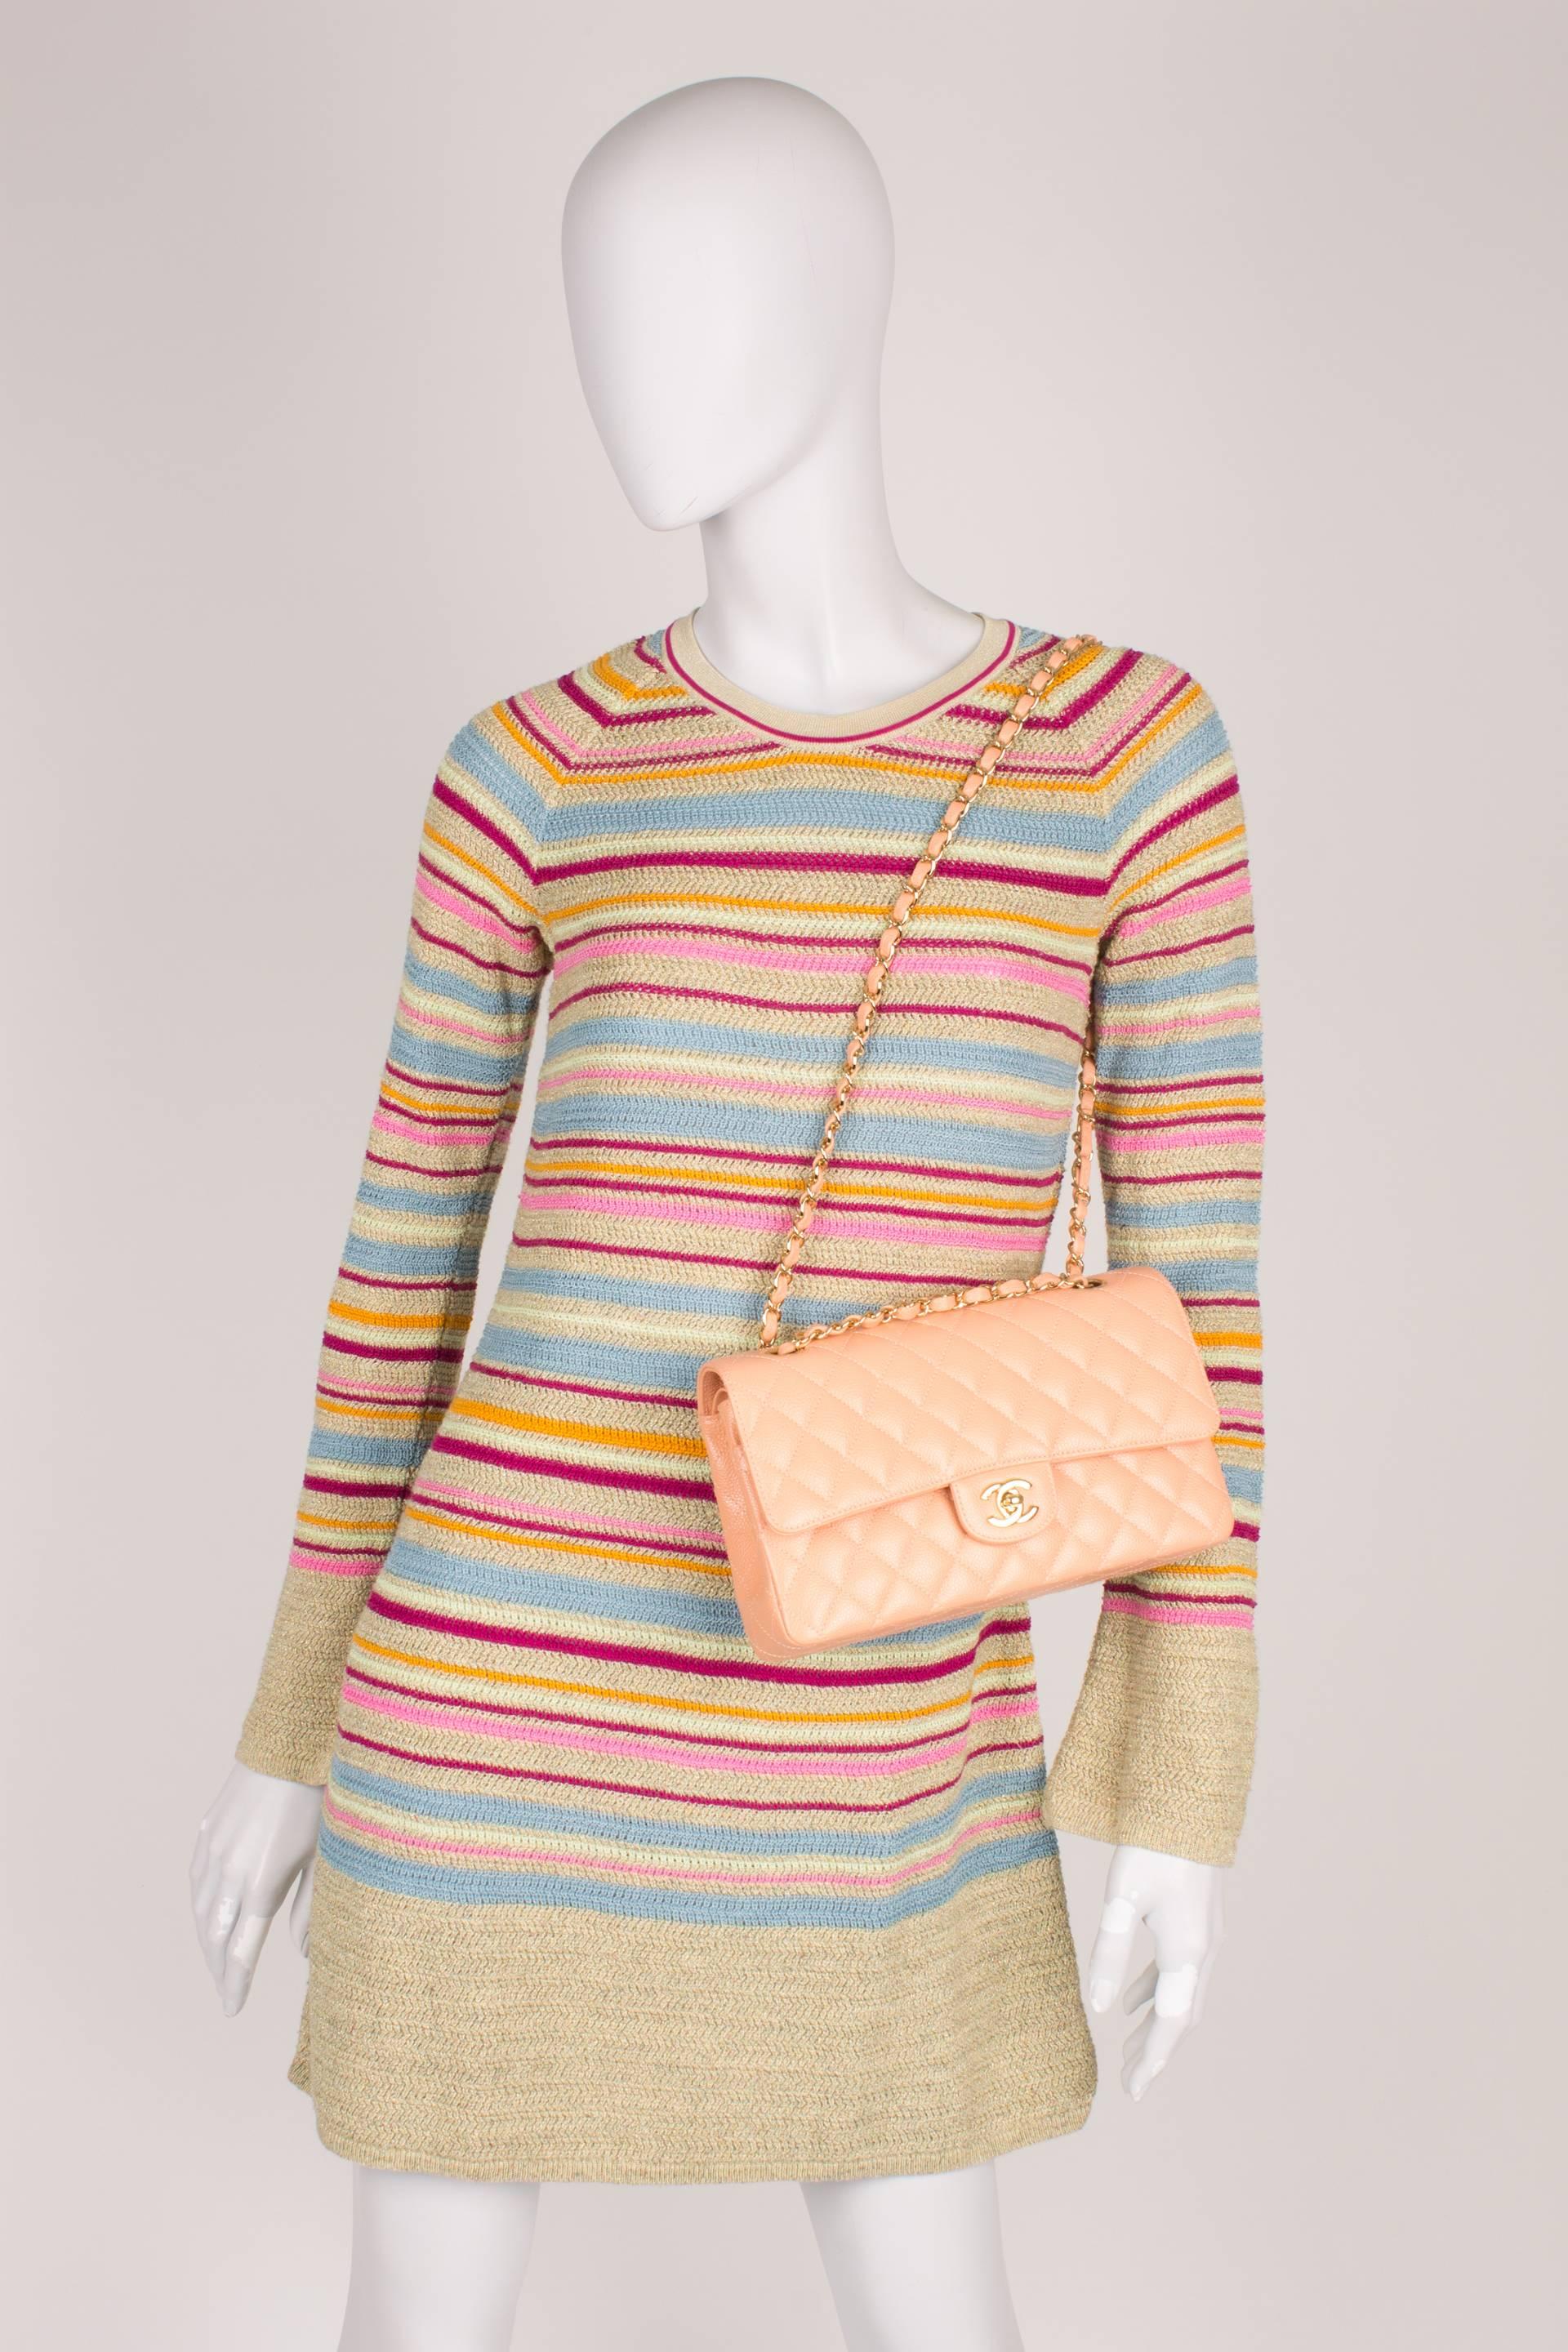 Beige Chanel Tan and Multi-Colored Cotton Knit Short Striped Dress Resort 2011 